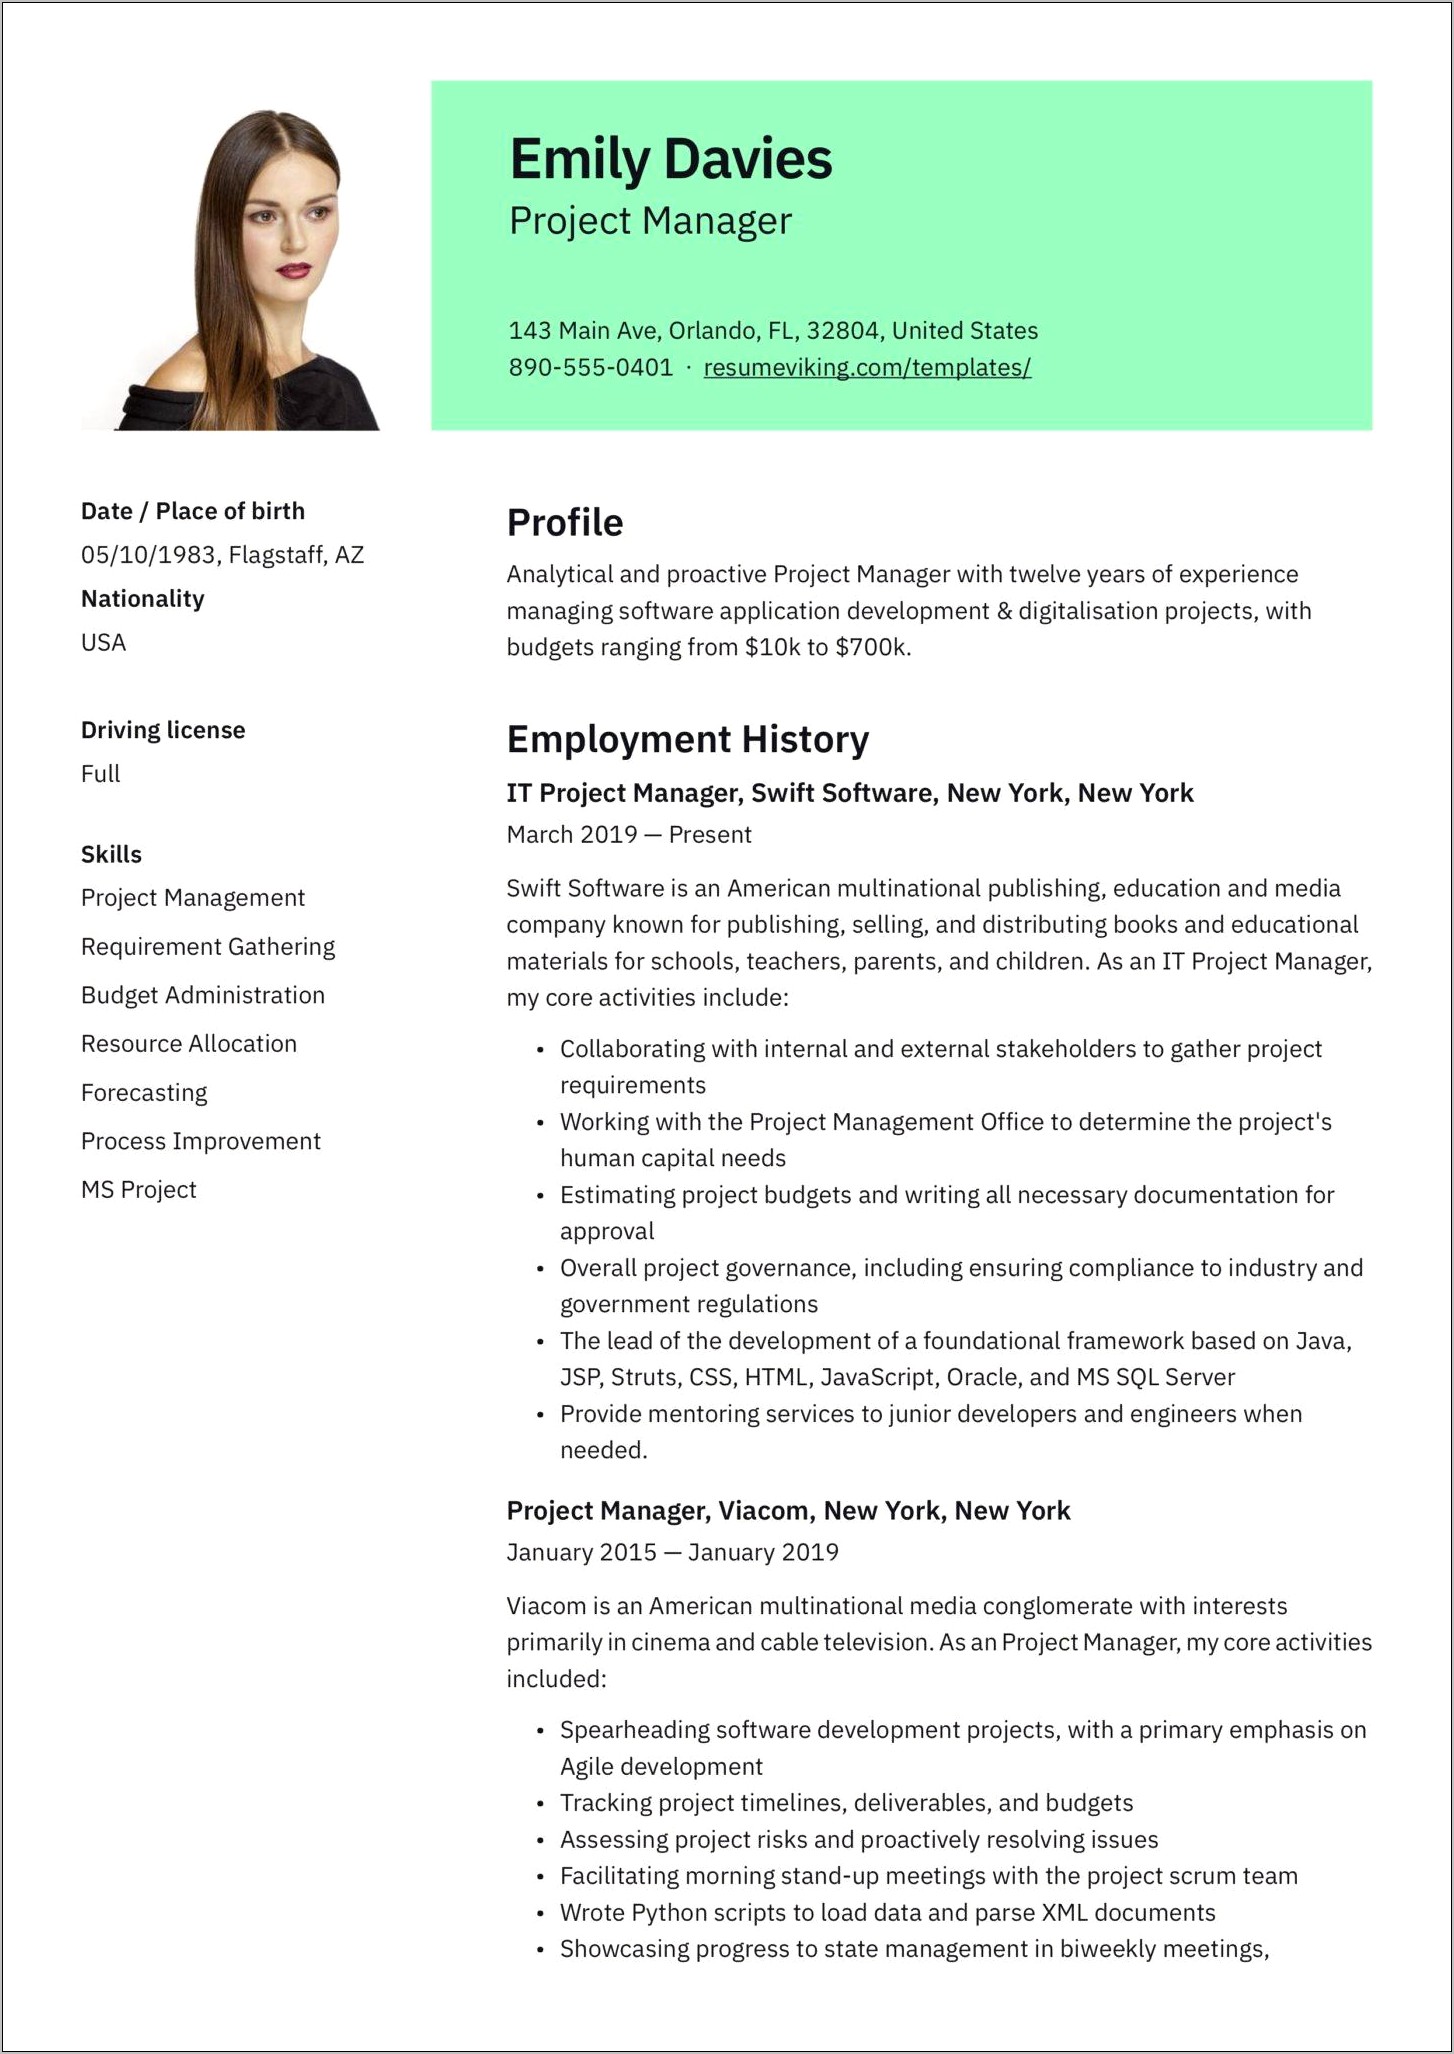 Executive Summary For Project Manager Resume